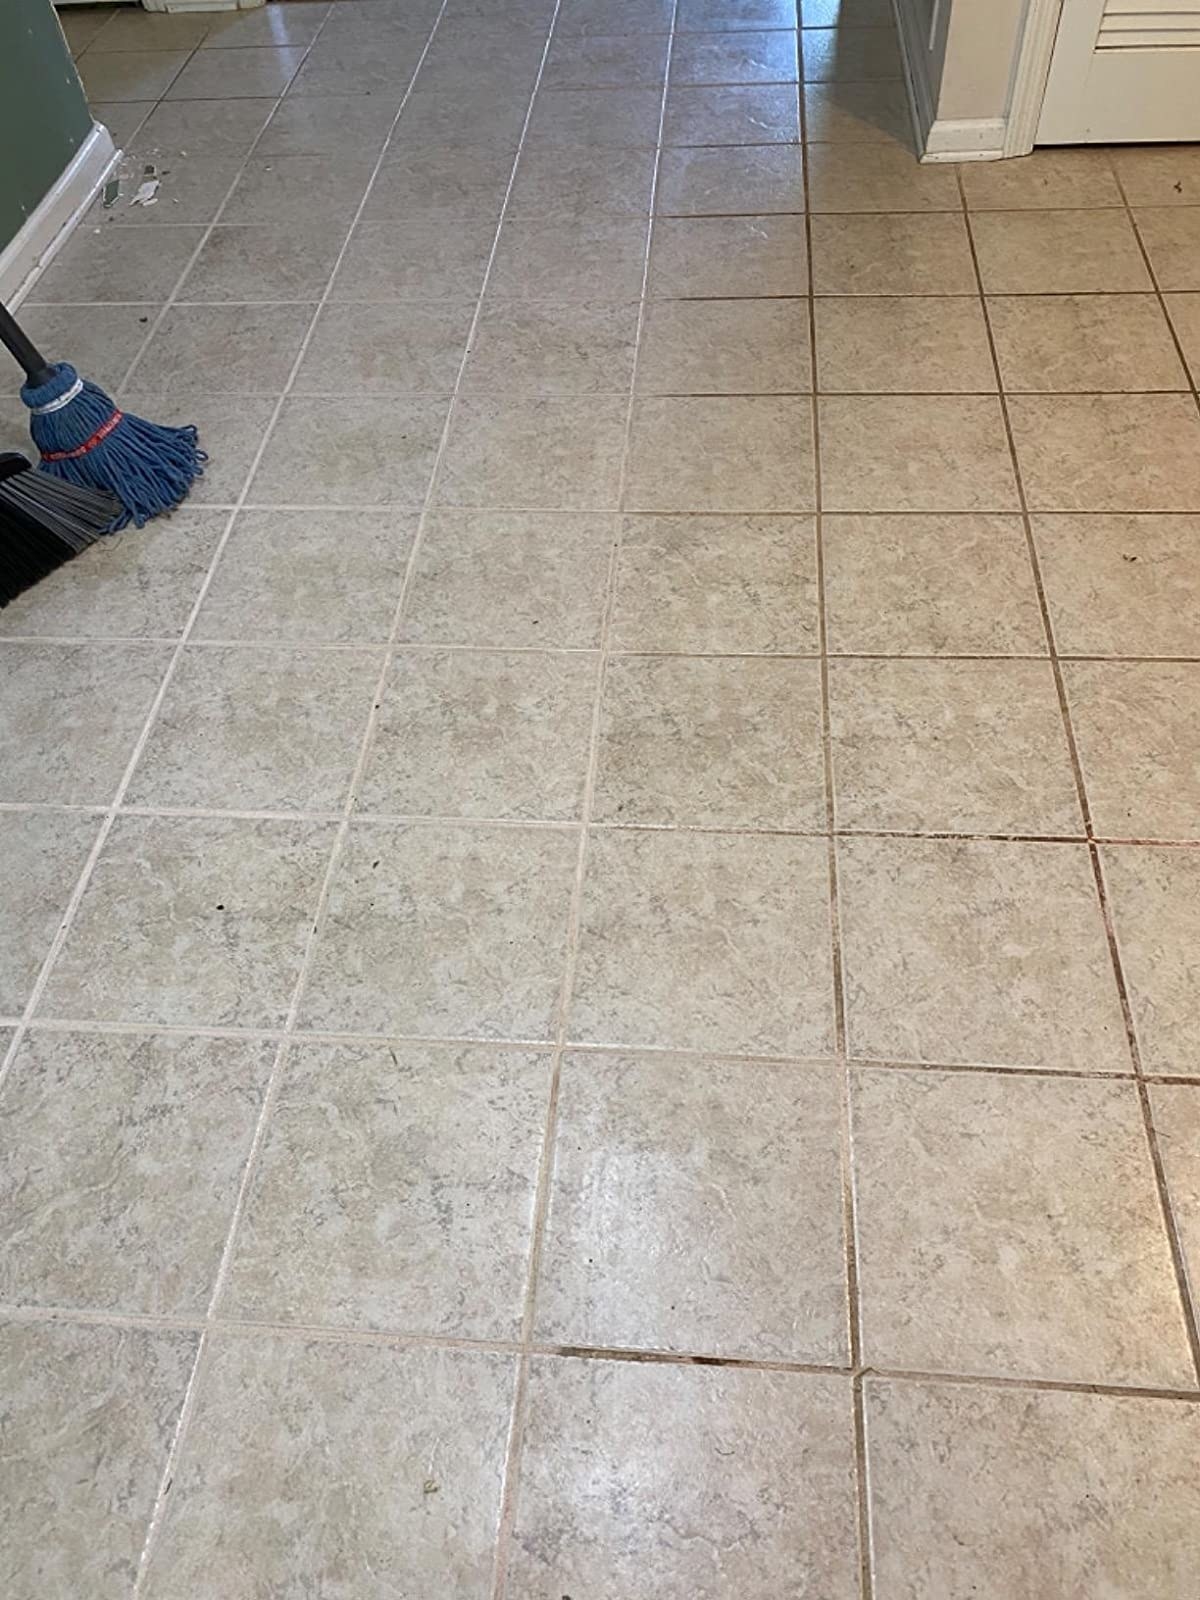 A reviewer demonstrates before and after using the product on floor grout, which was almost black and is now white.